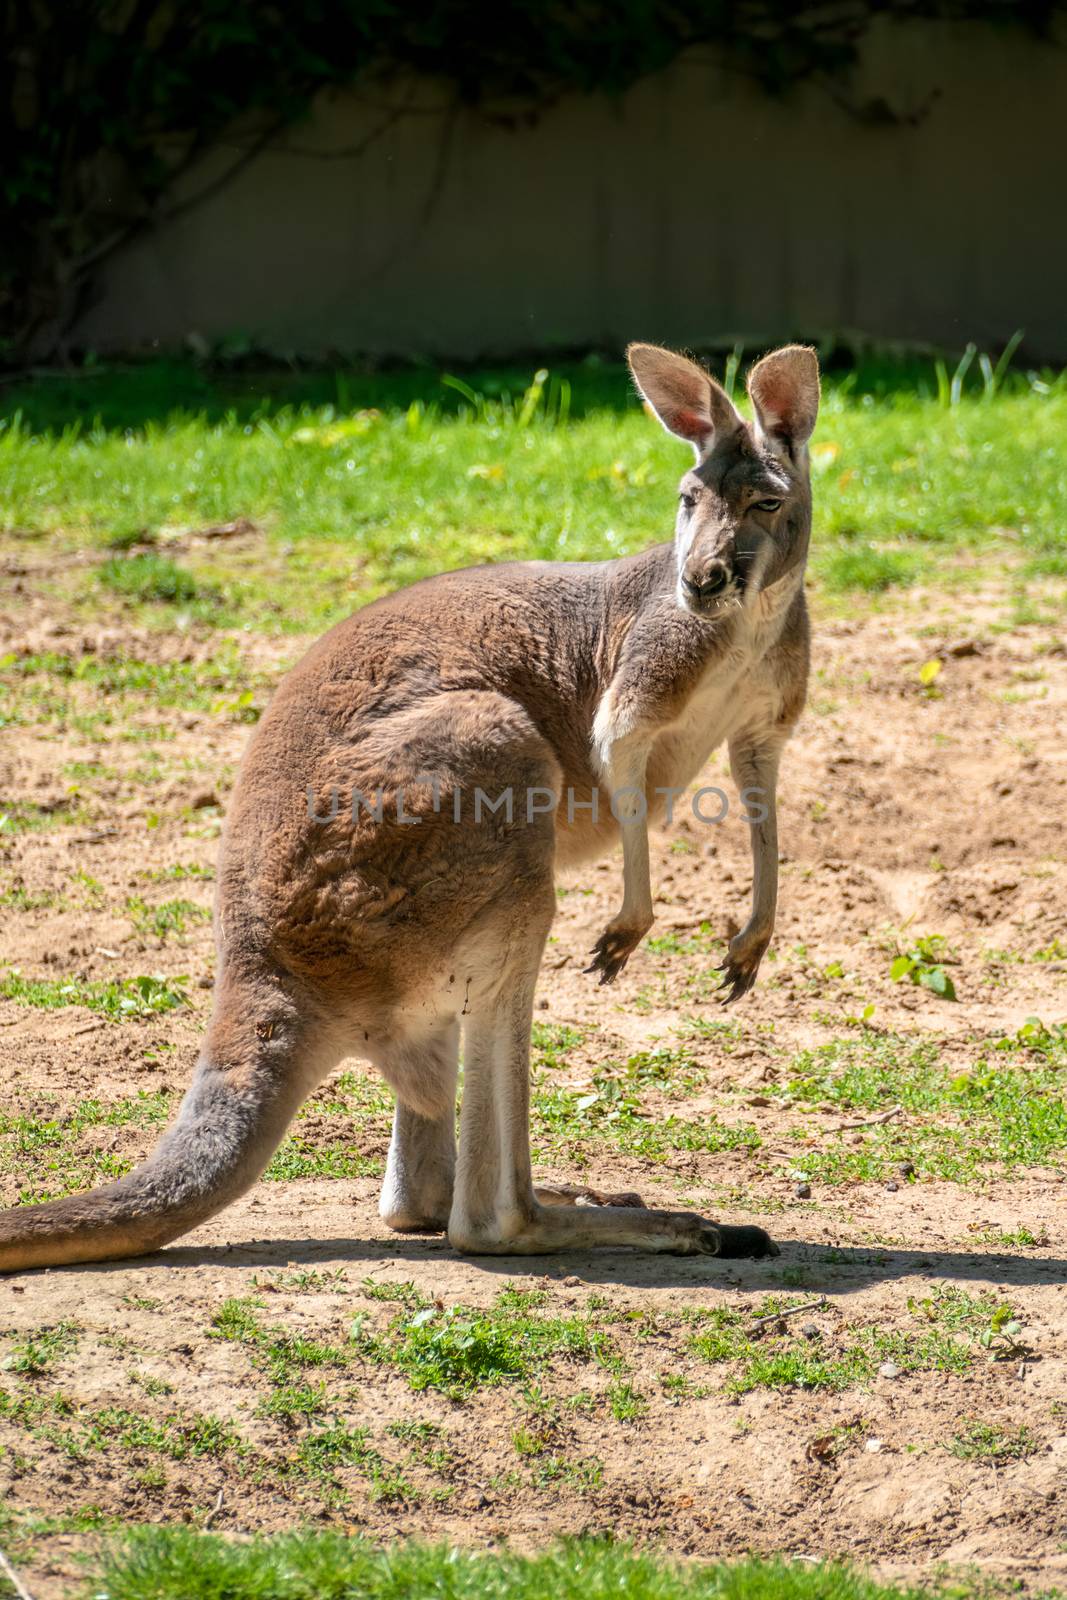 An image of a typical kangaroo standing and watching